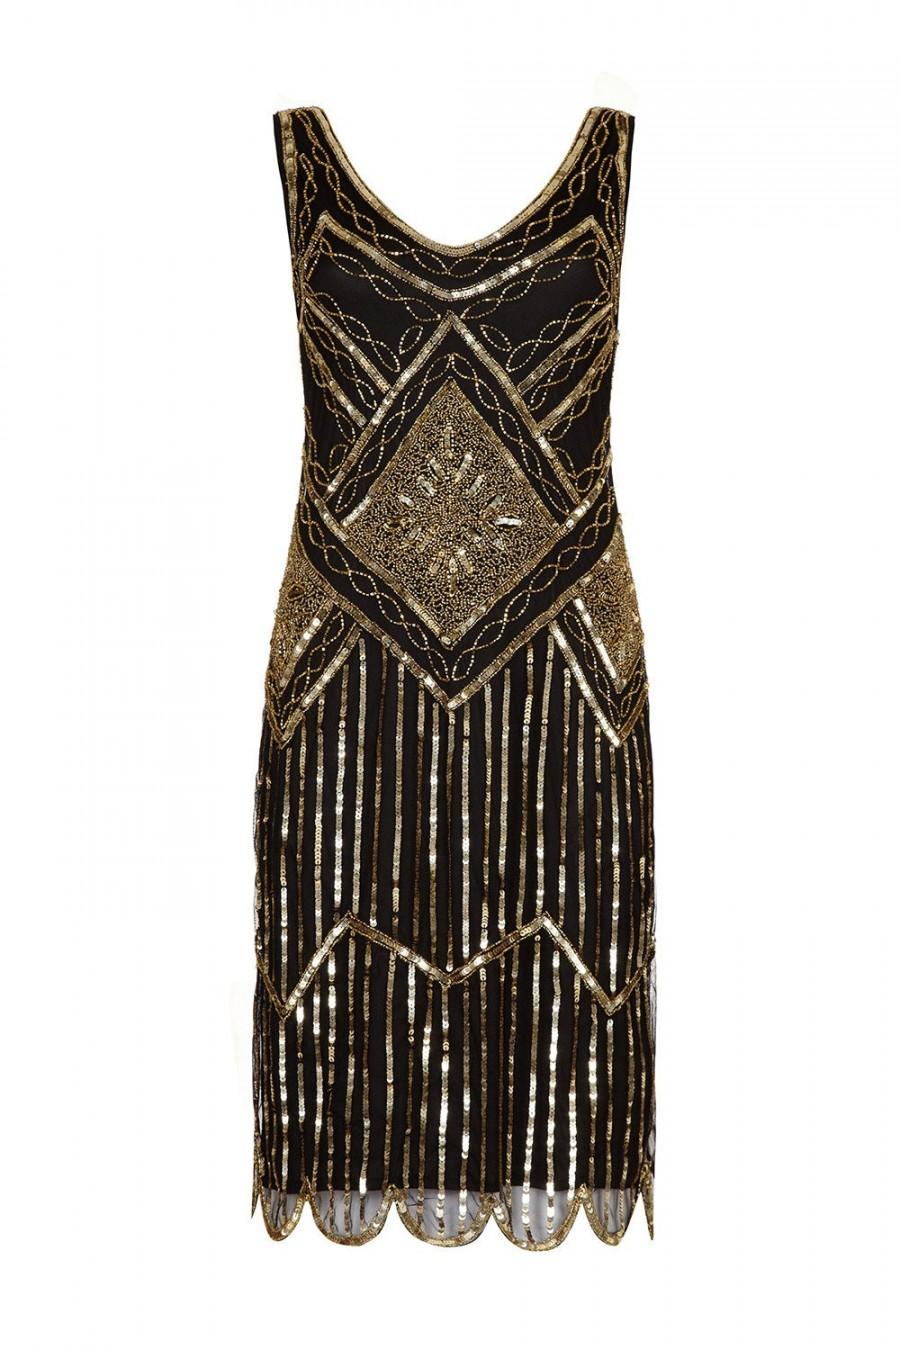 Mariage - PETITE Length UK20 US16 AUS20 Black Gold Vintage inspired 1920s Flapper Great Gatsby Charleston Sequin Downton Abbey Wedding Dress Hand Made